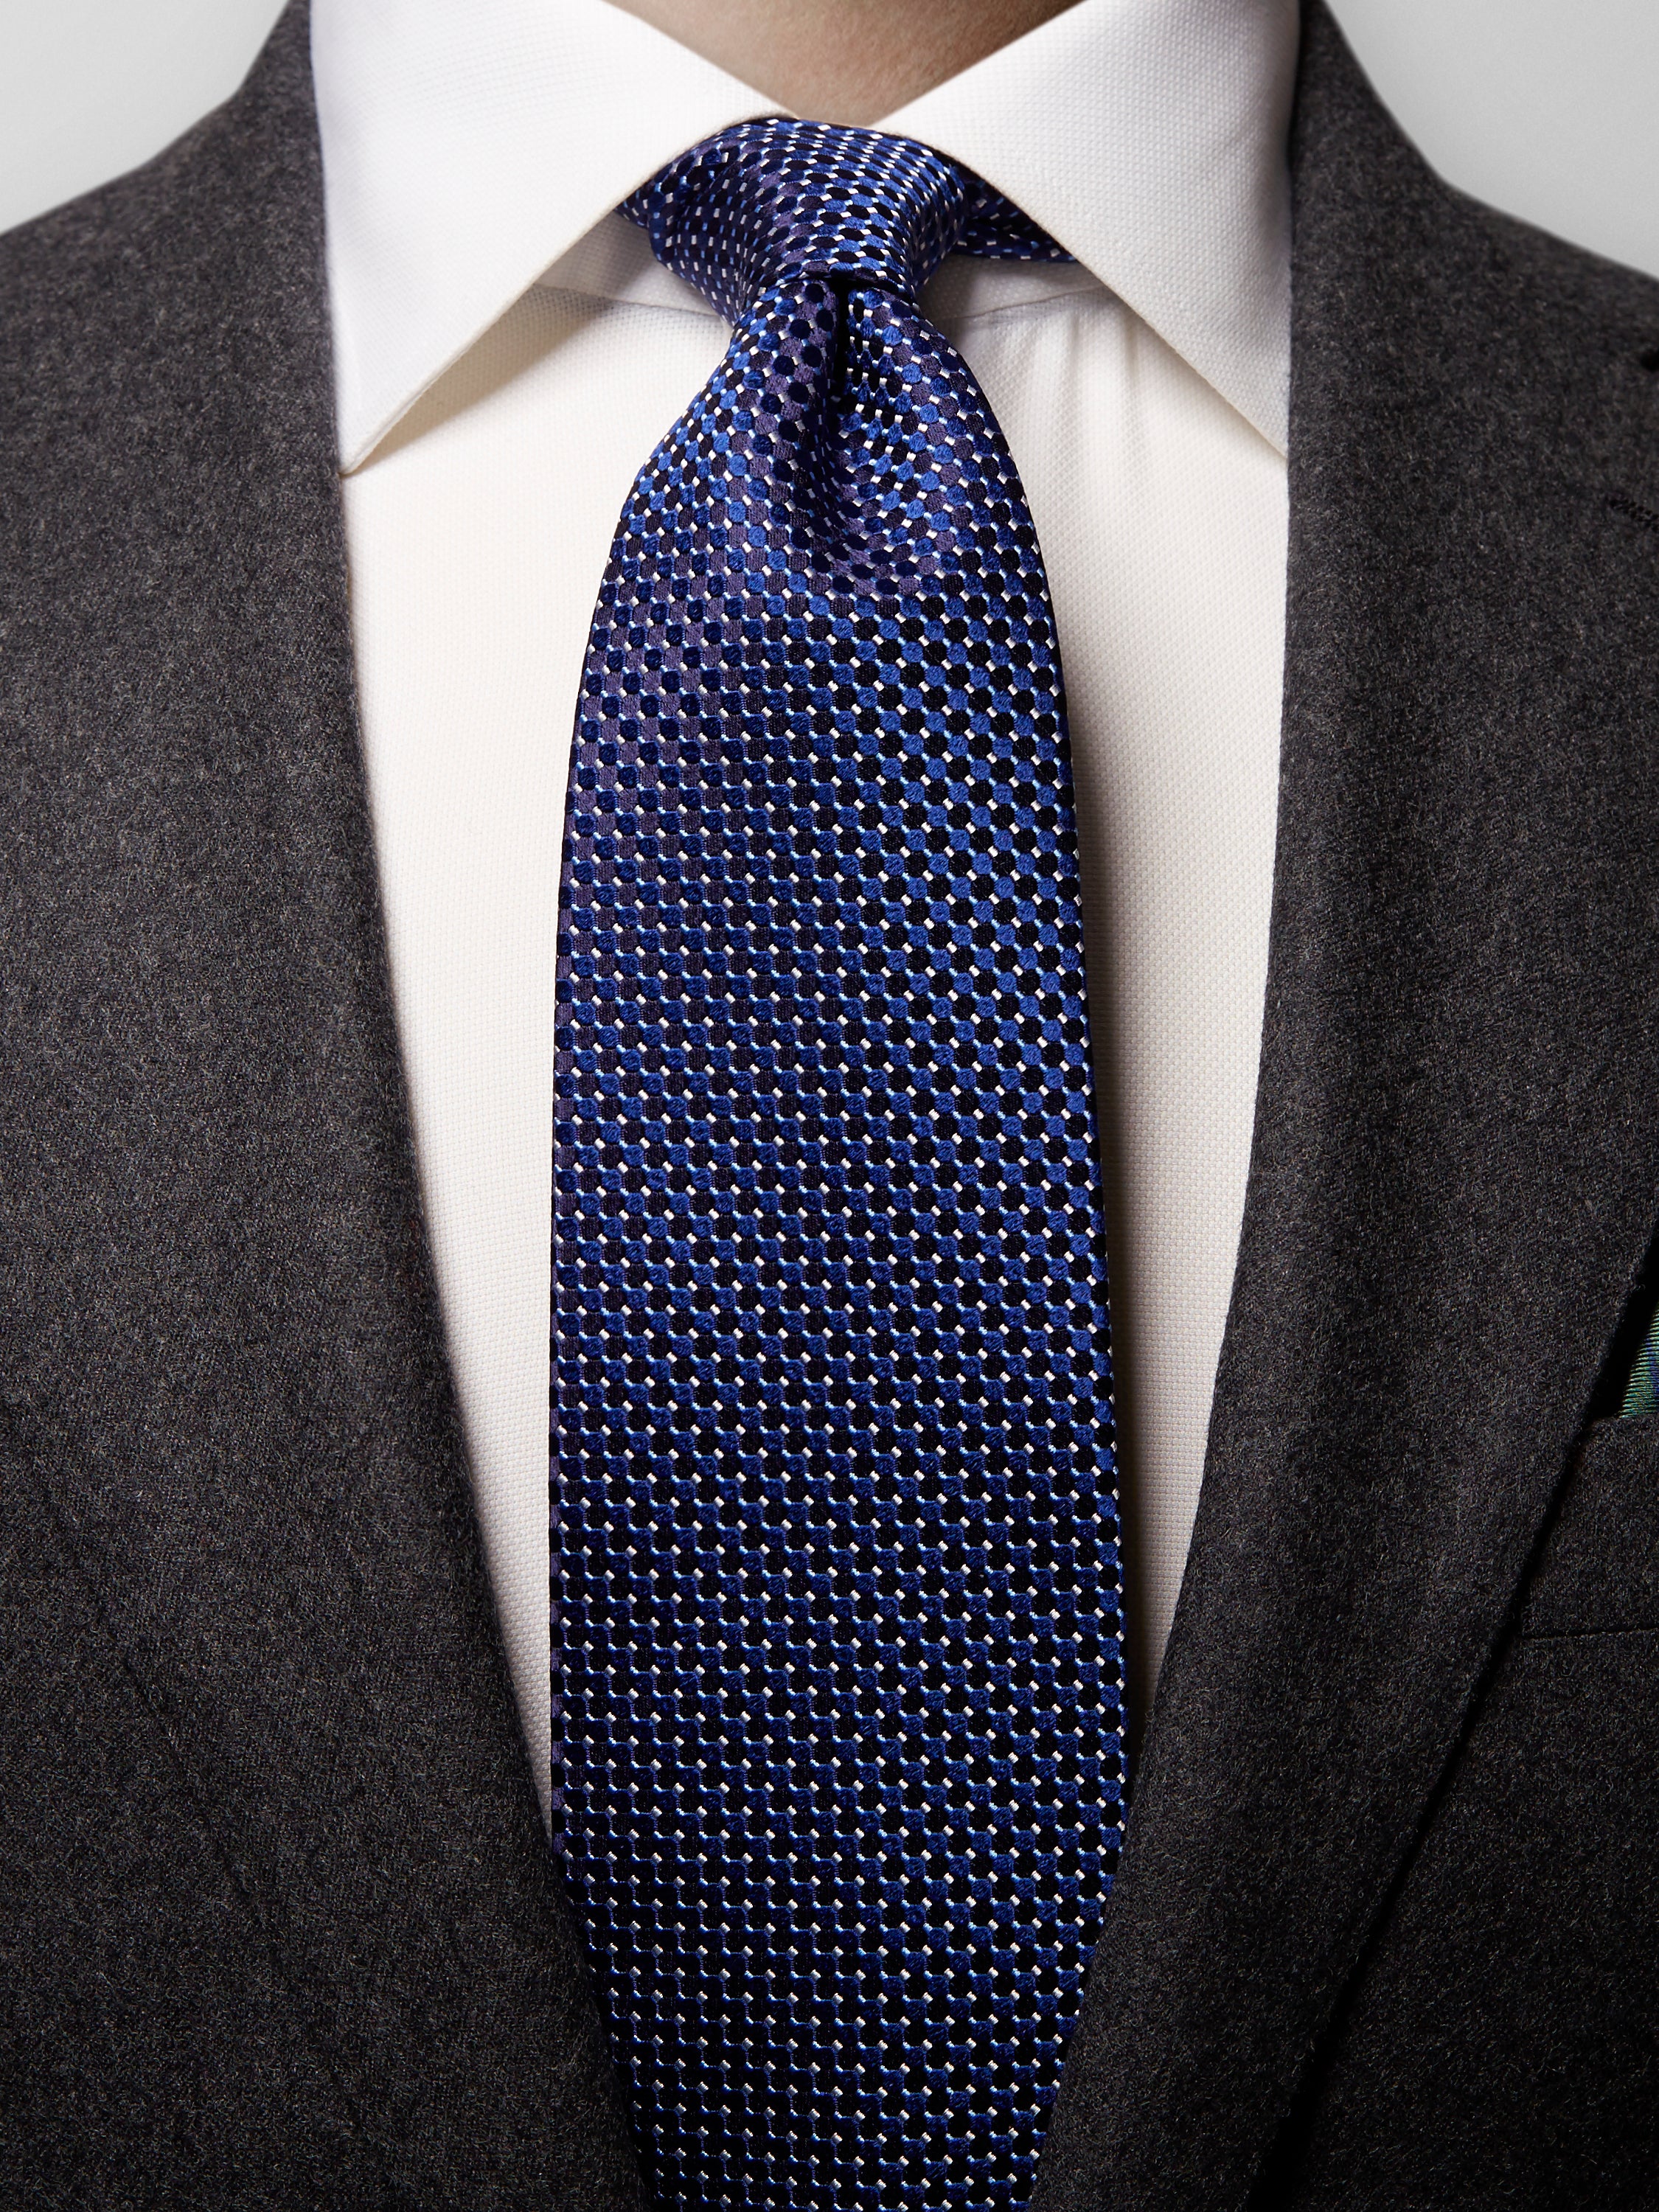 Ties | Accessories | Clothing | Louis Copeland & Sons